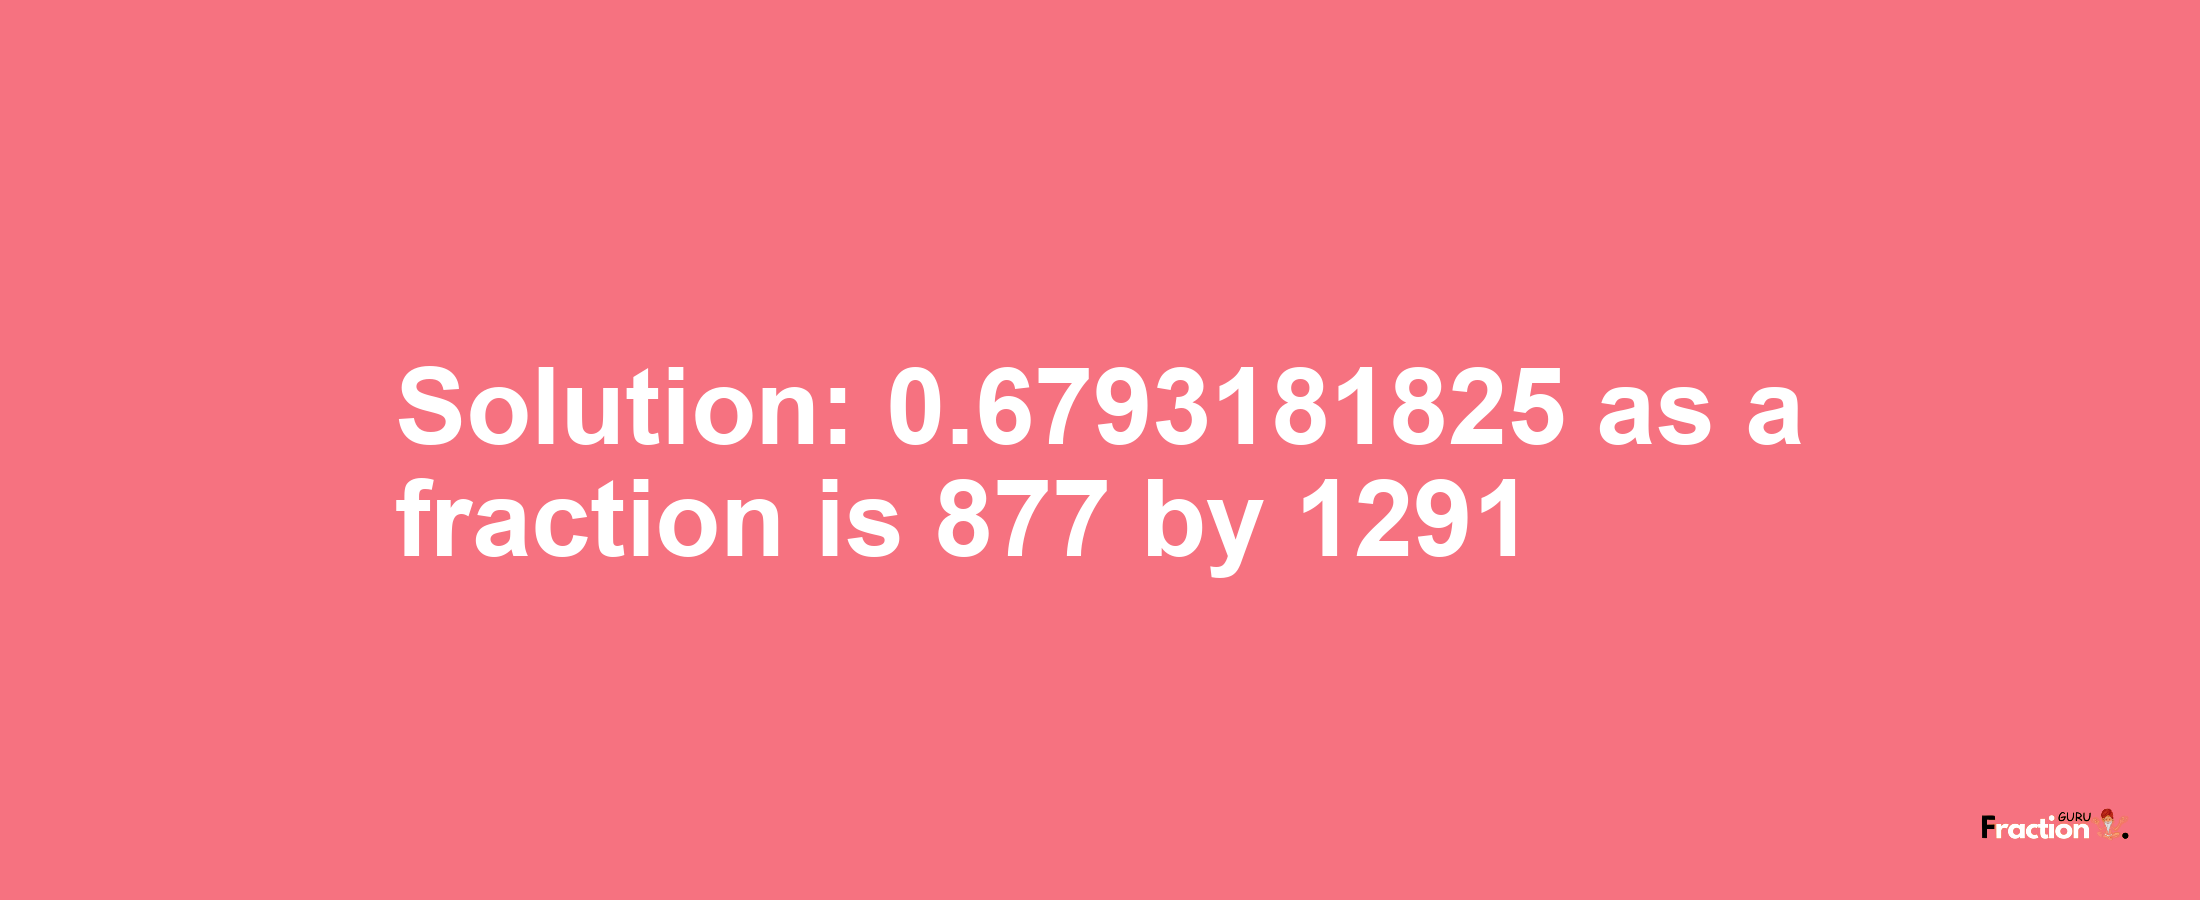 Solution:0.6793181825 as a fraction is 877/1291